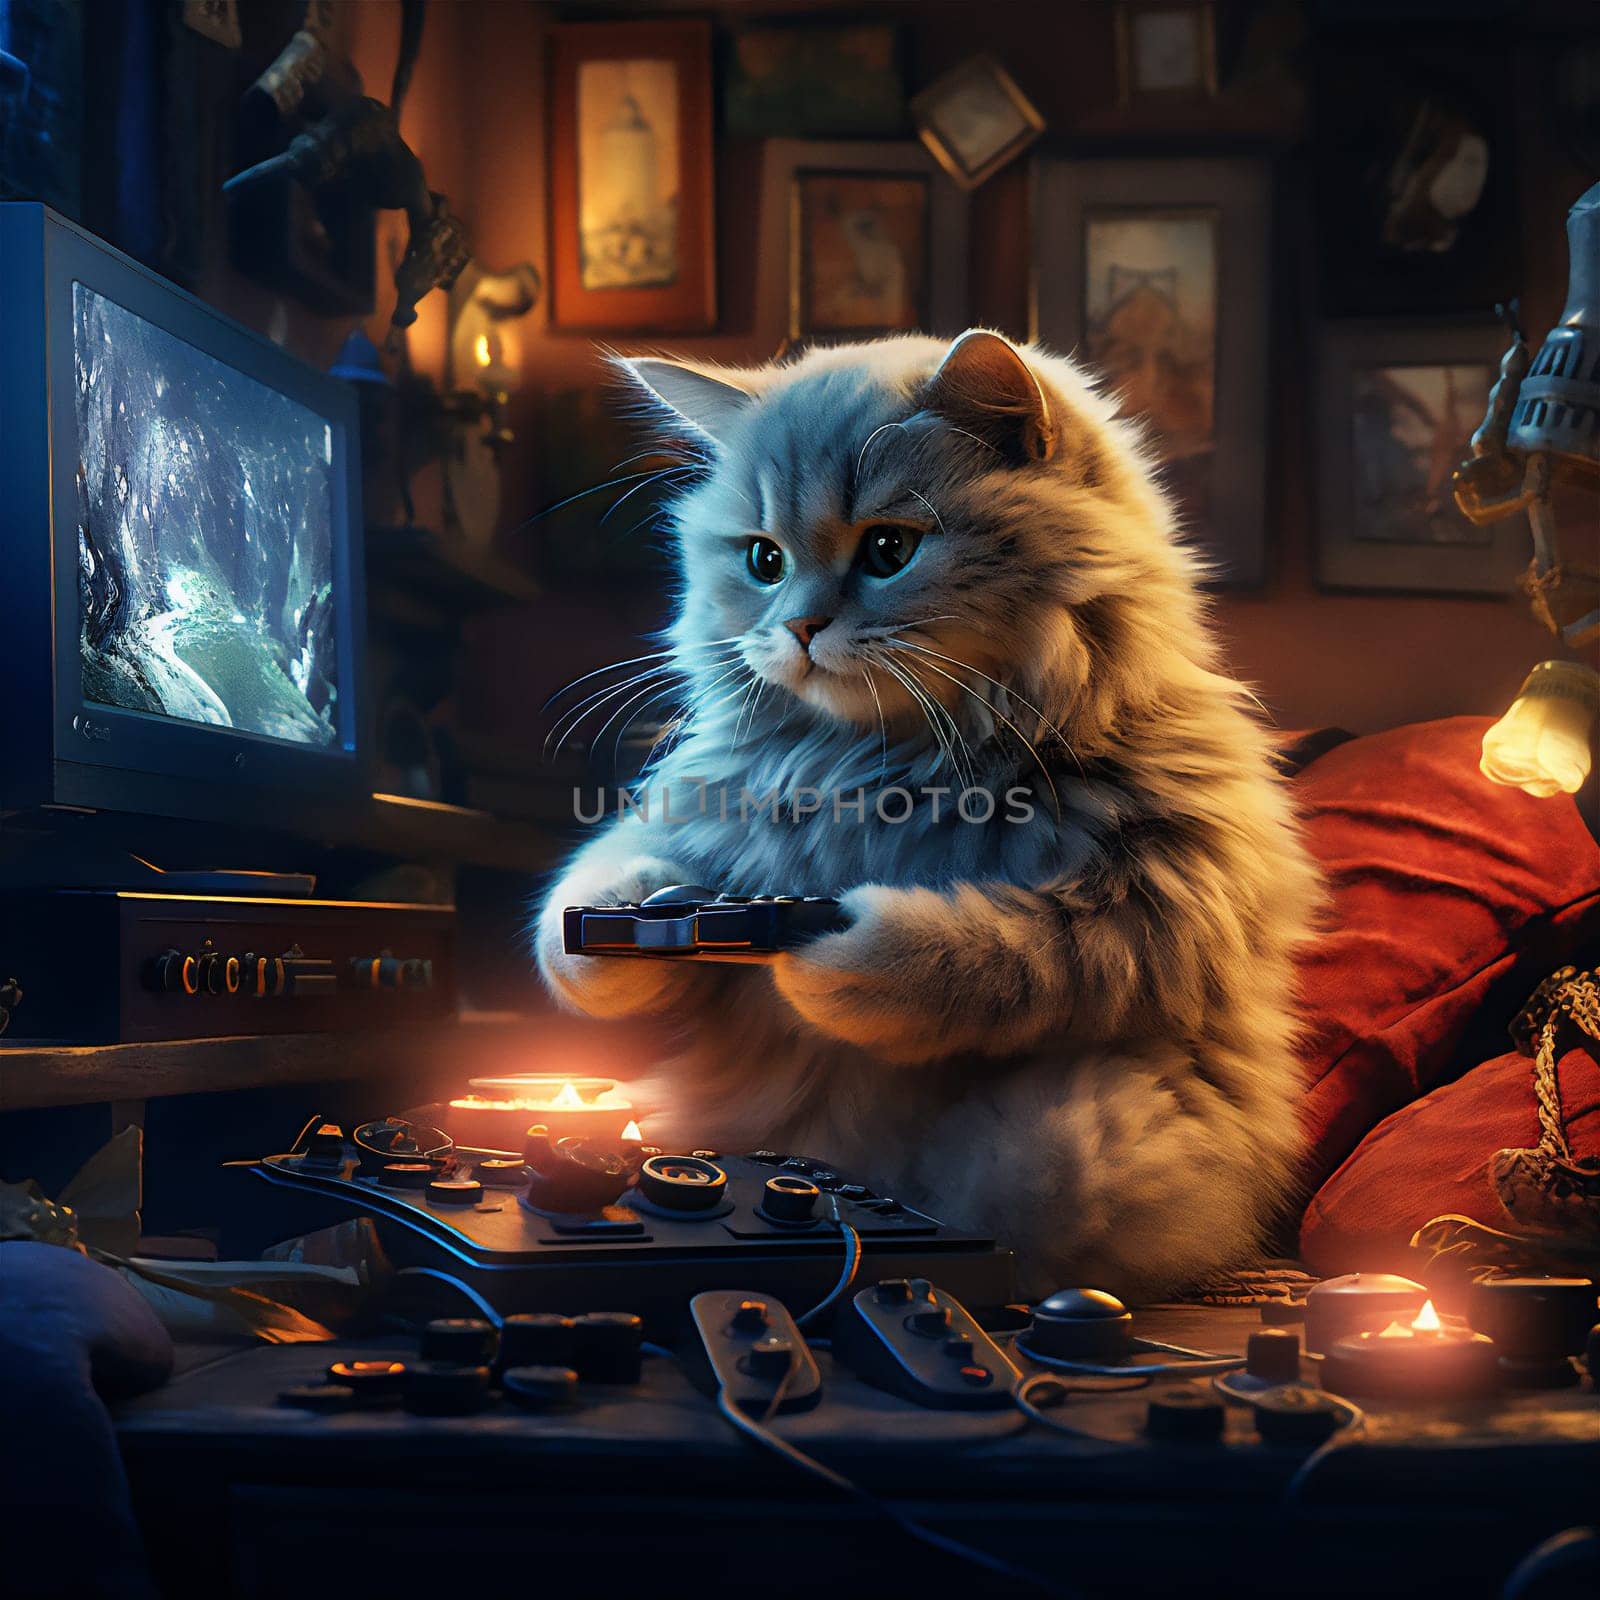 Cute tabby cat is enjoying gaming session on computer by IrynaMelnyk